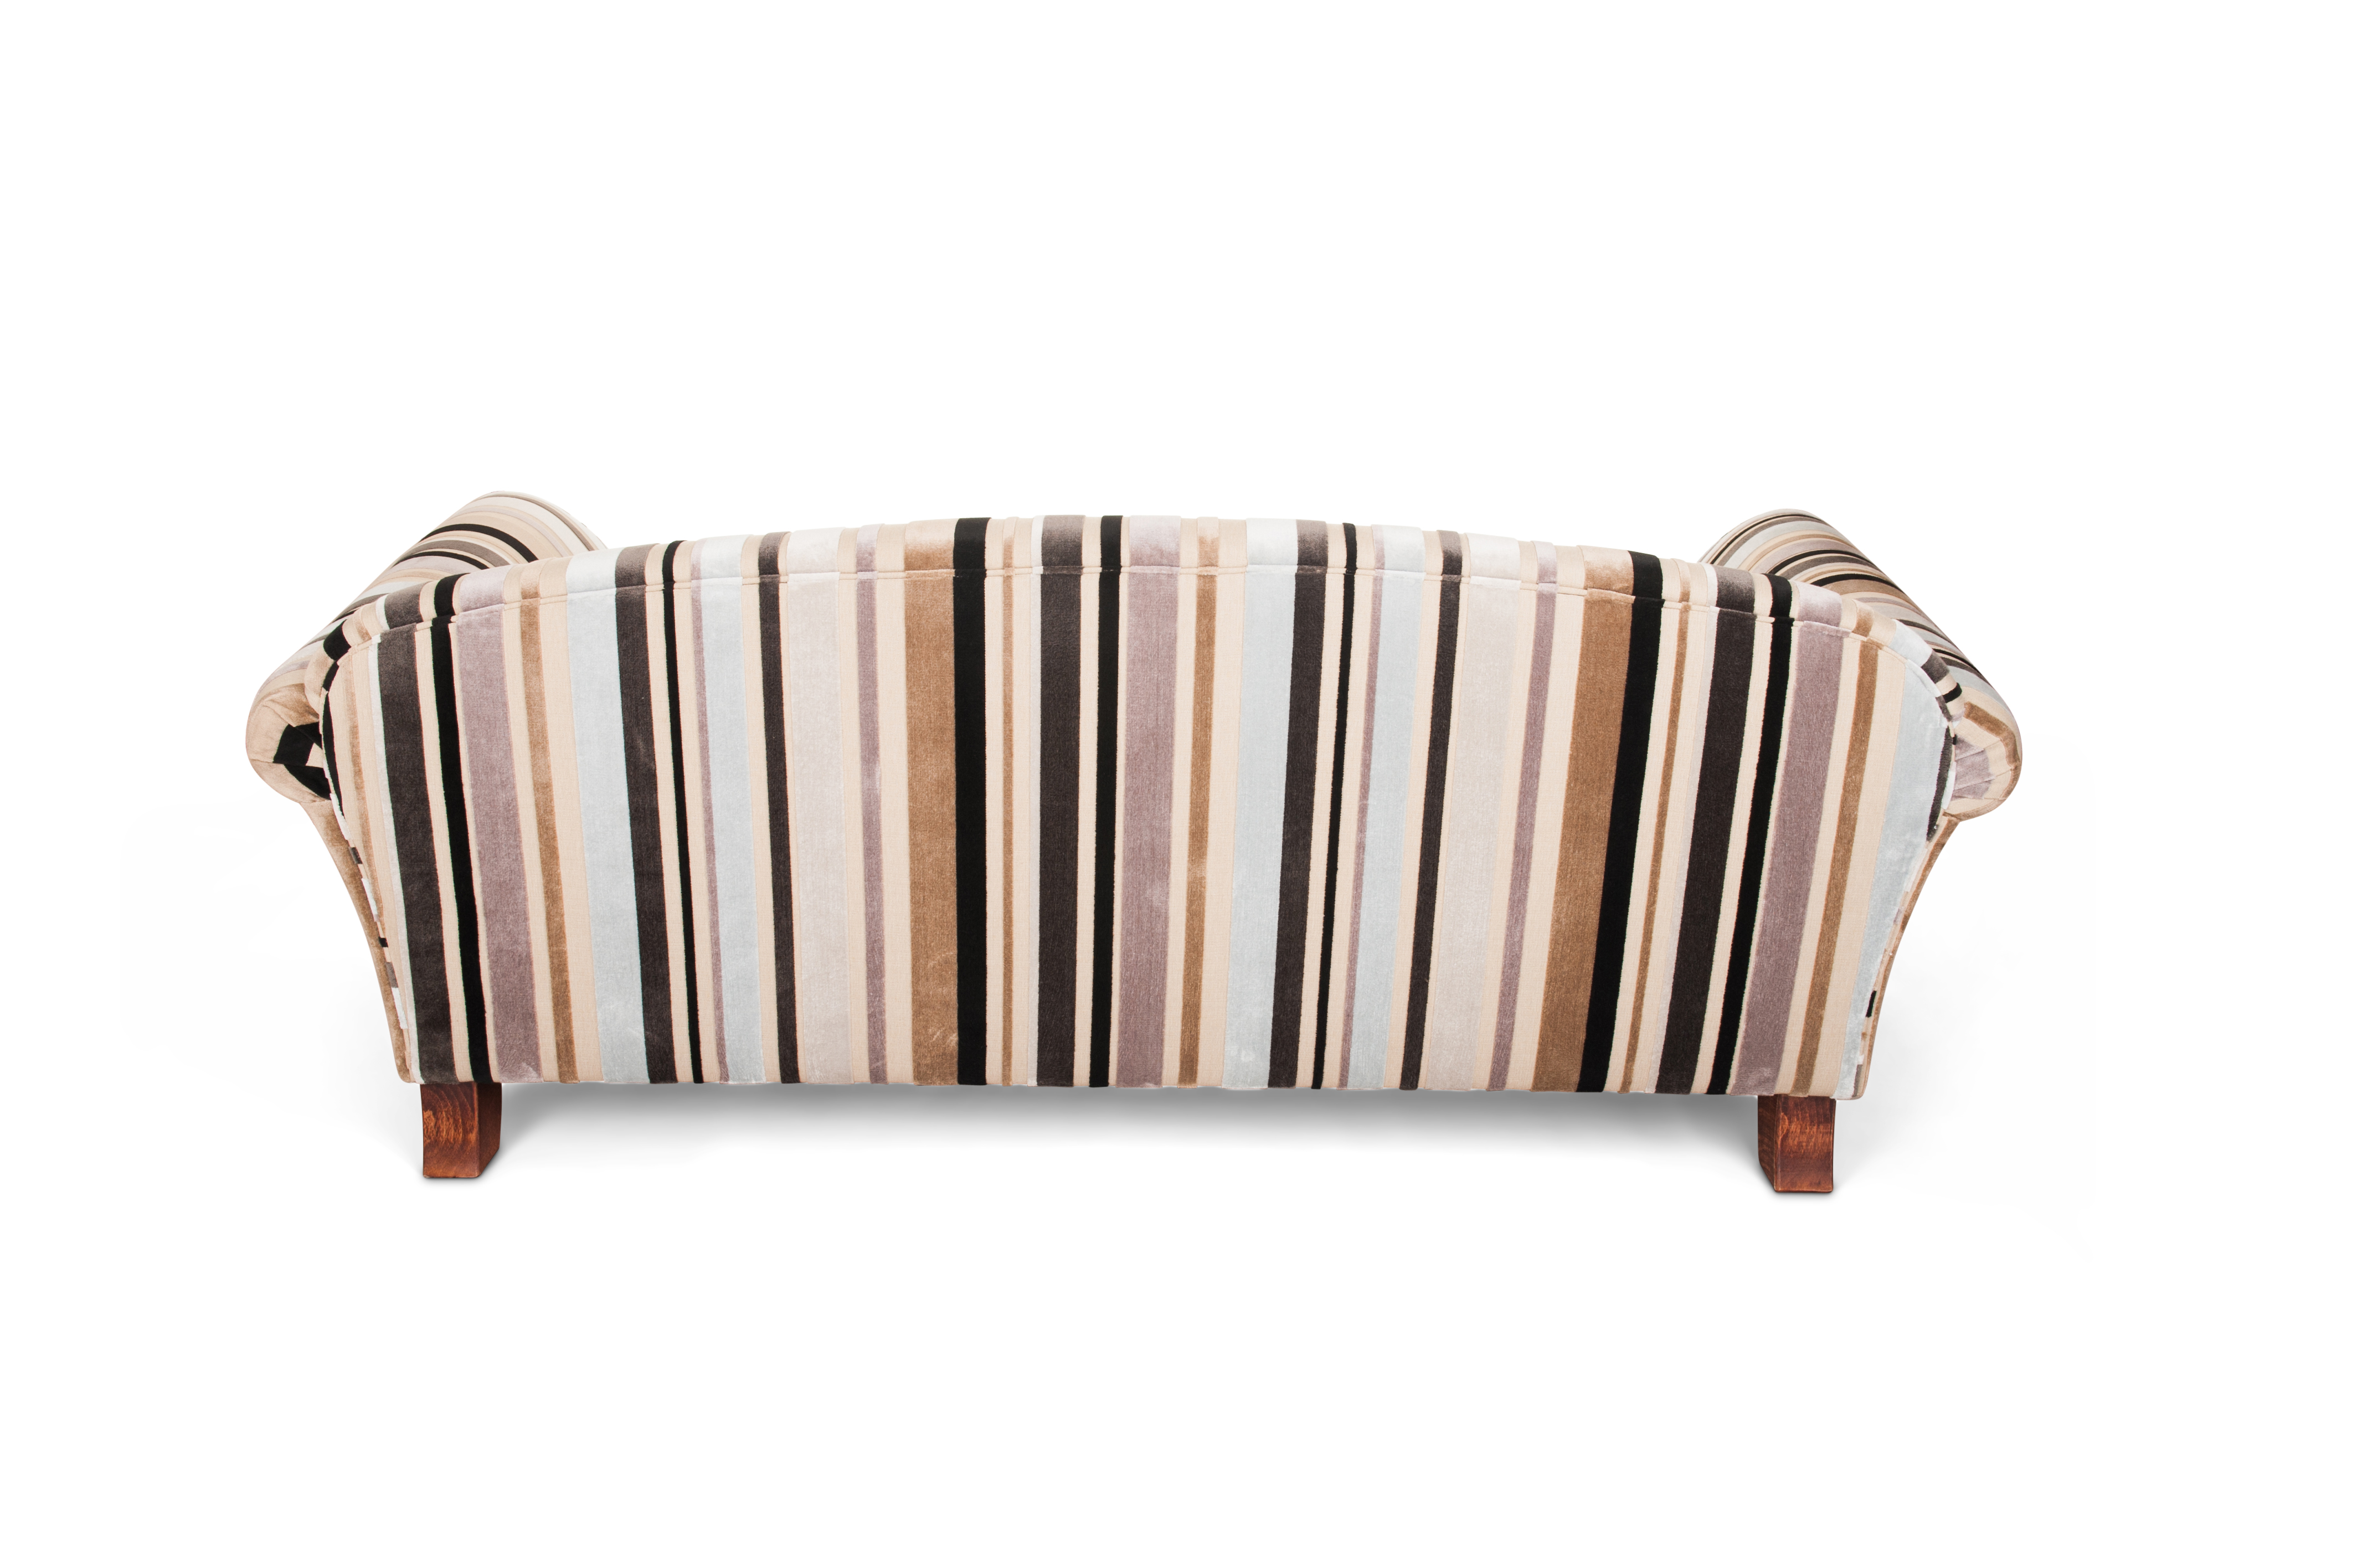 Auden sofa and chairs